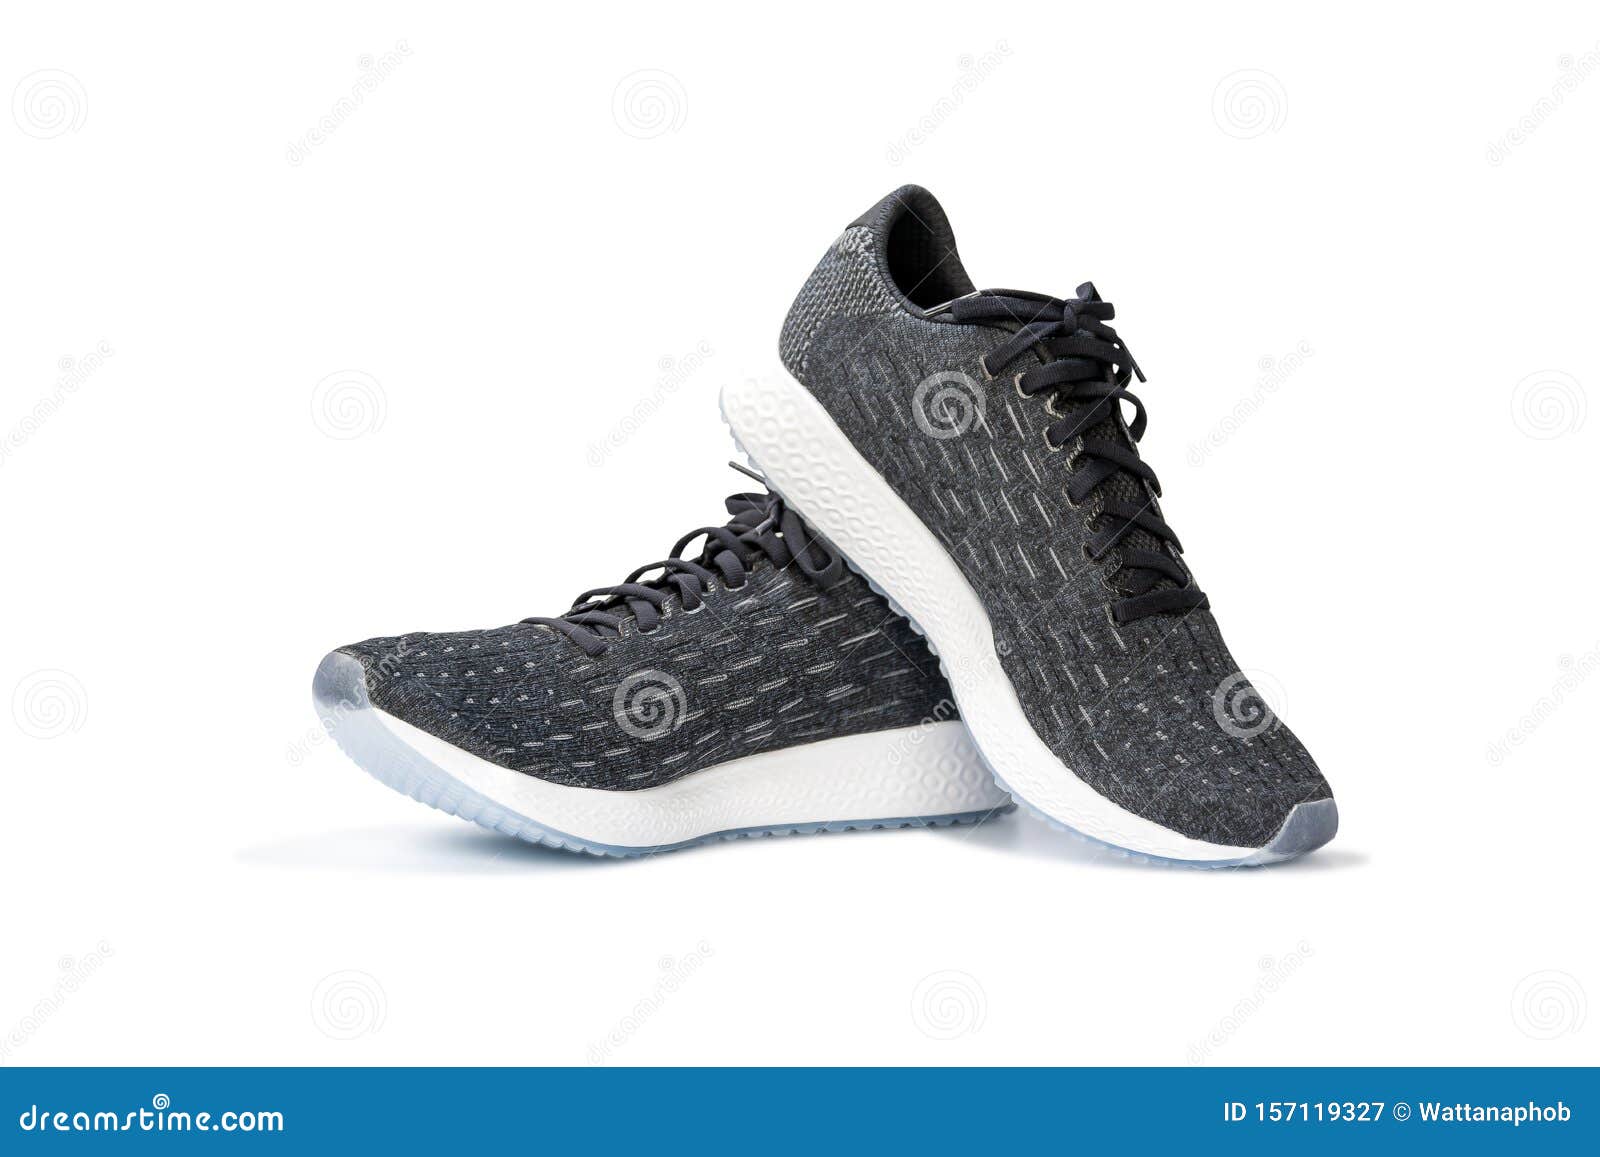 Fashion Running Sneaker Shoes Isolated Stock Image - Image of rubber ...